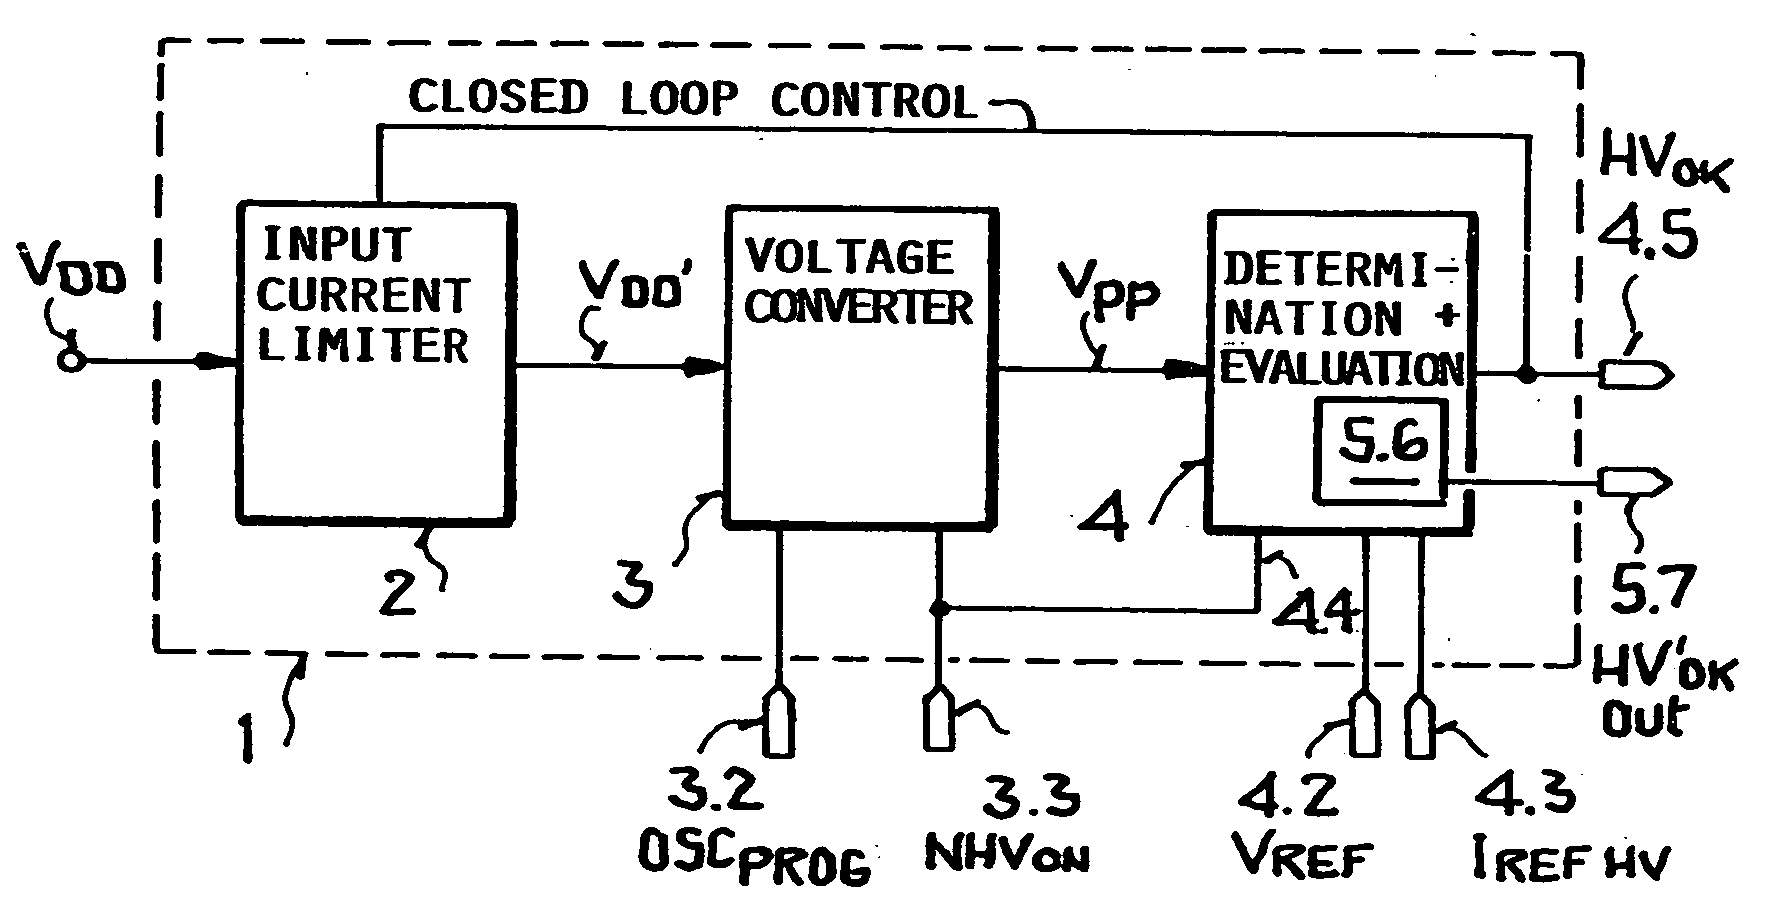 Circuit arrangement and method for increasing the functional range of a transponder